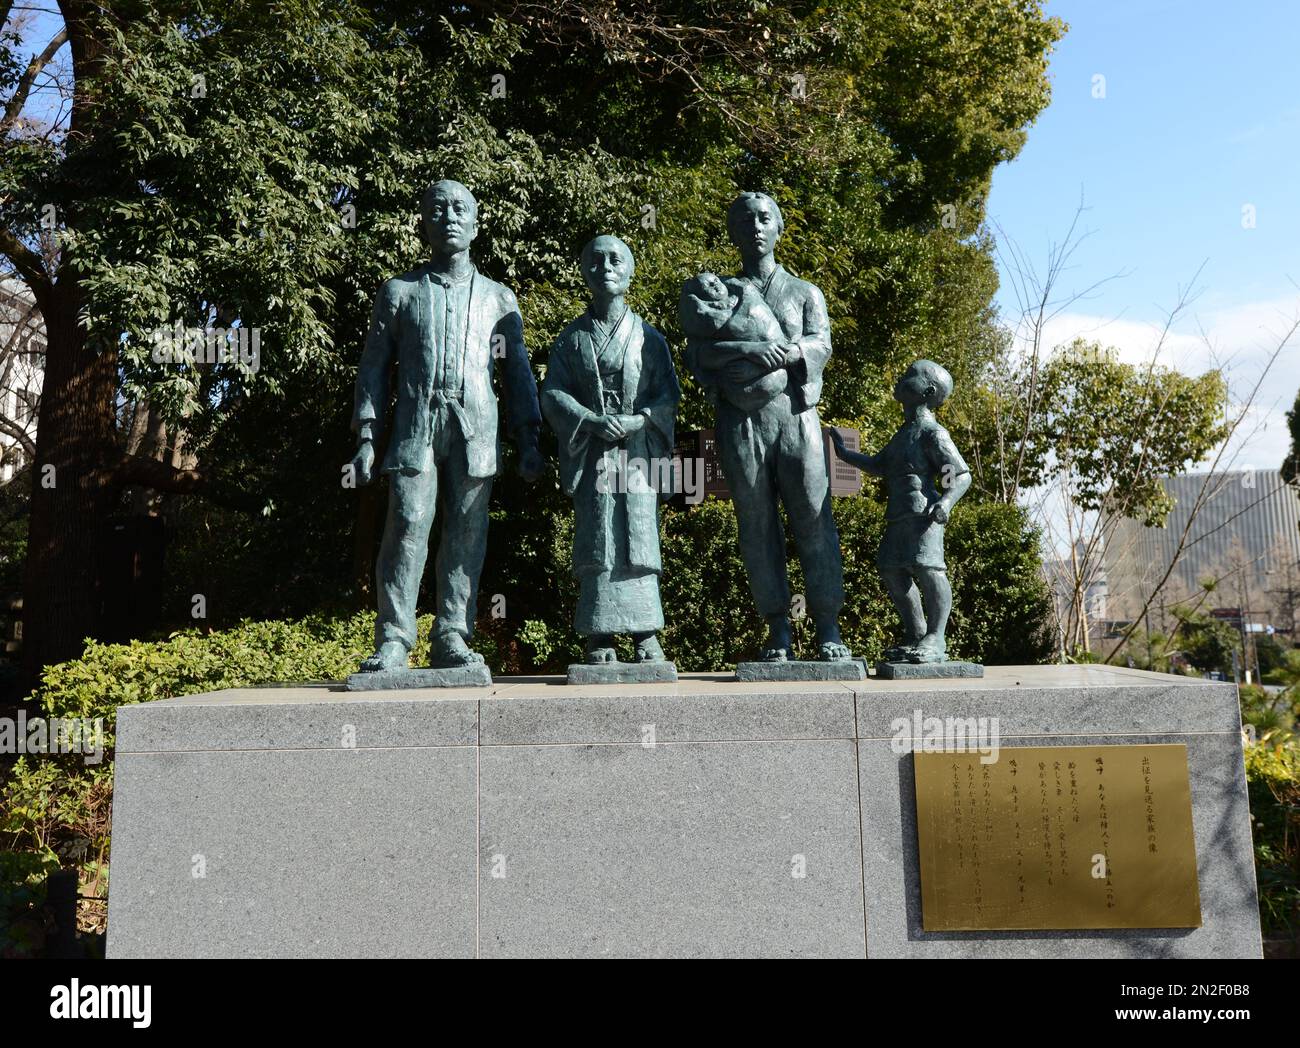 Bronze sculptures of a Japanese family at the Yasukuni Shrine park complex in Chiyoda, Tokyo, Japan. Stock Photo